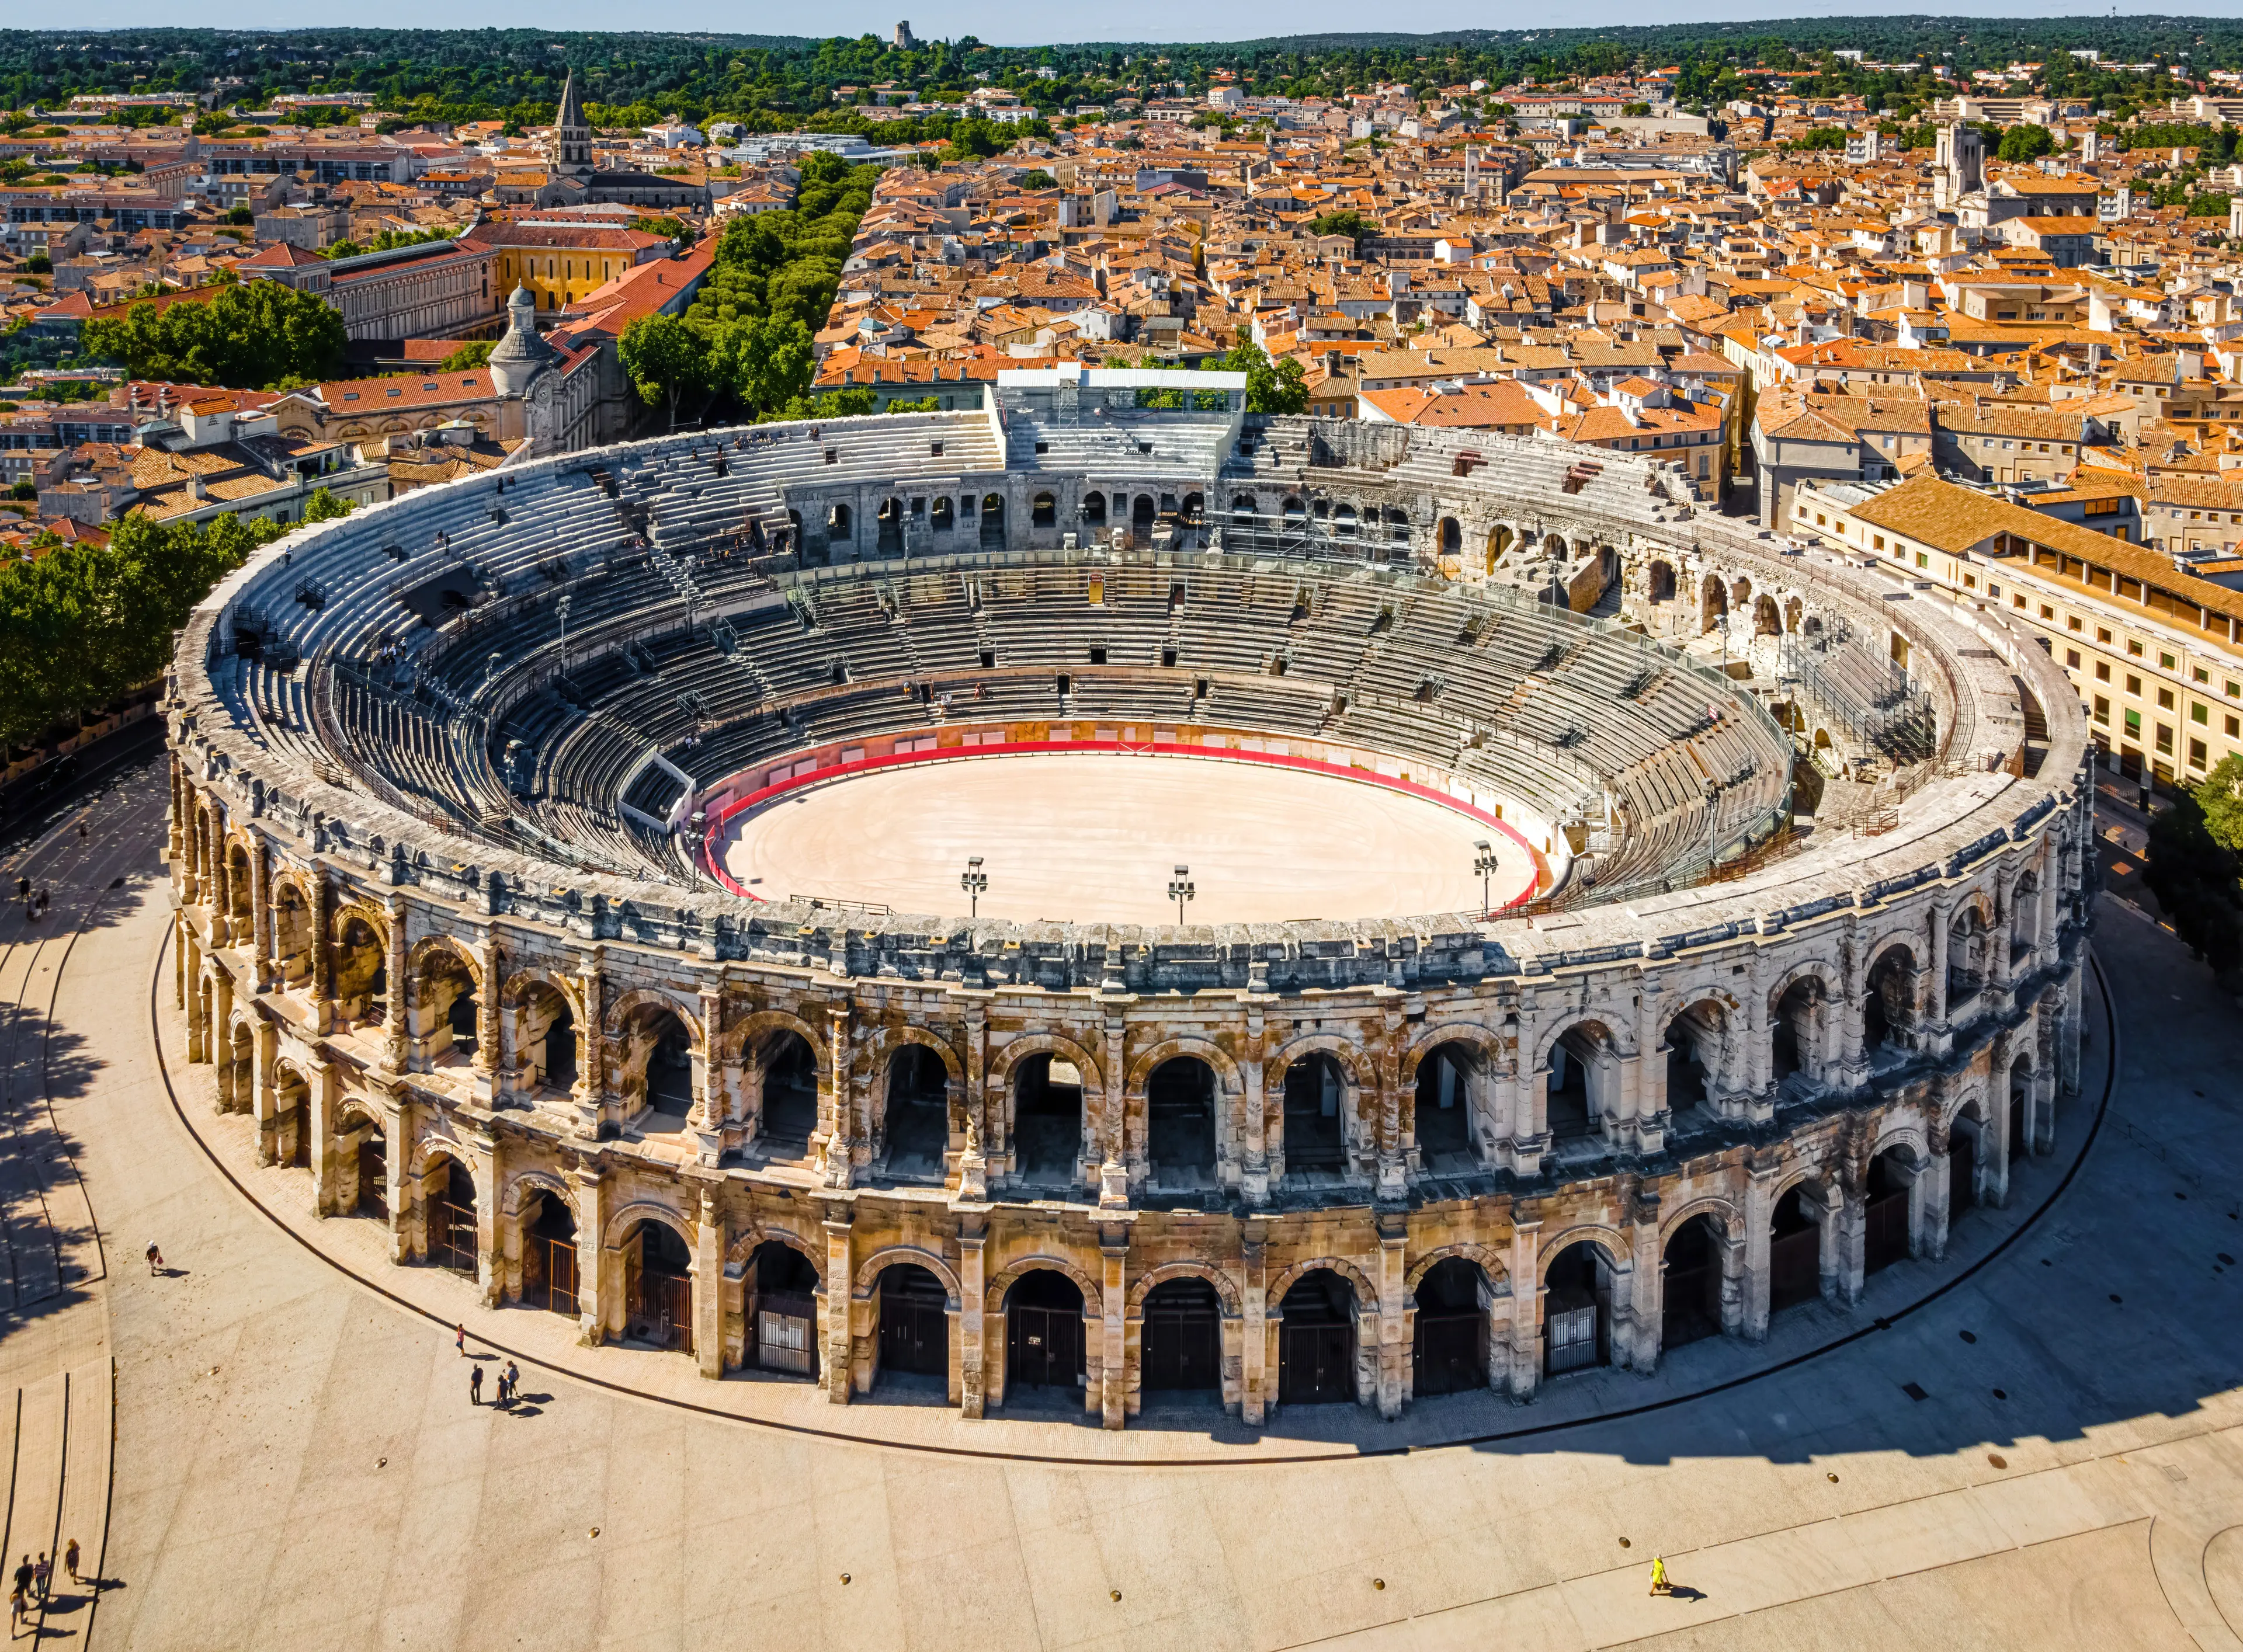 2-Day Nimes Exploration: Local Cuisine, Wine and Outdoor Fun with Friends